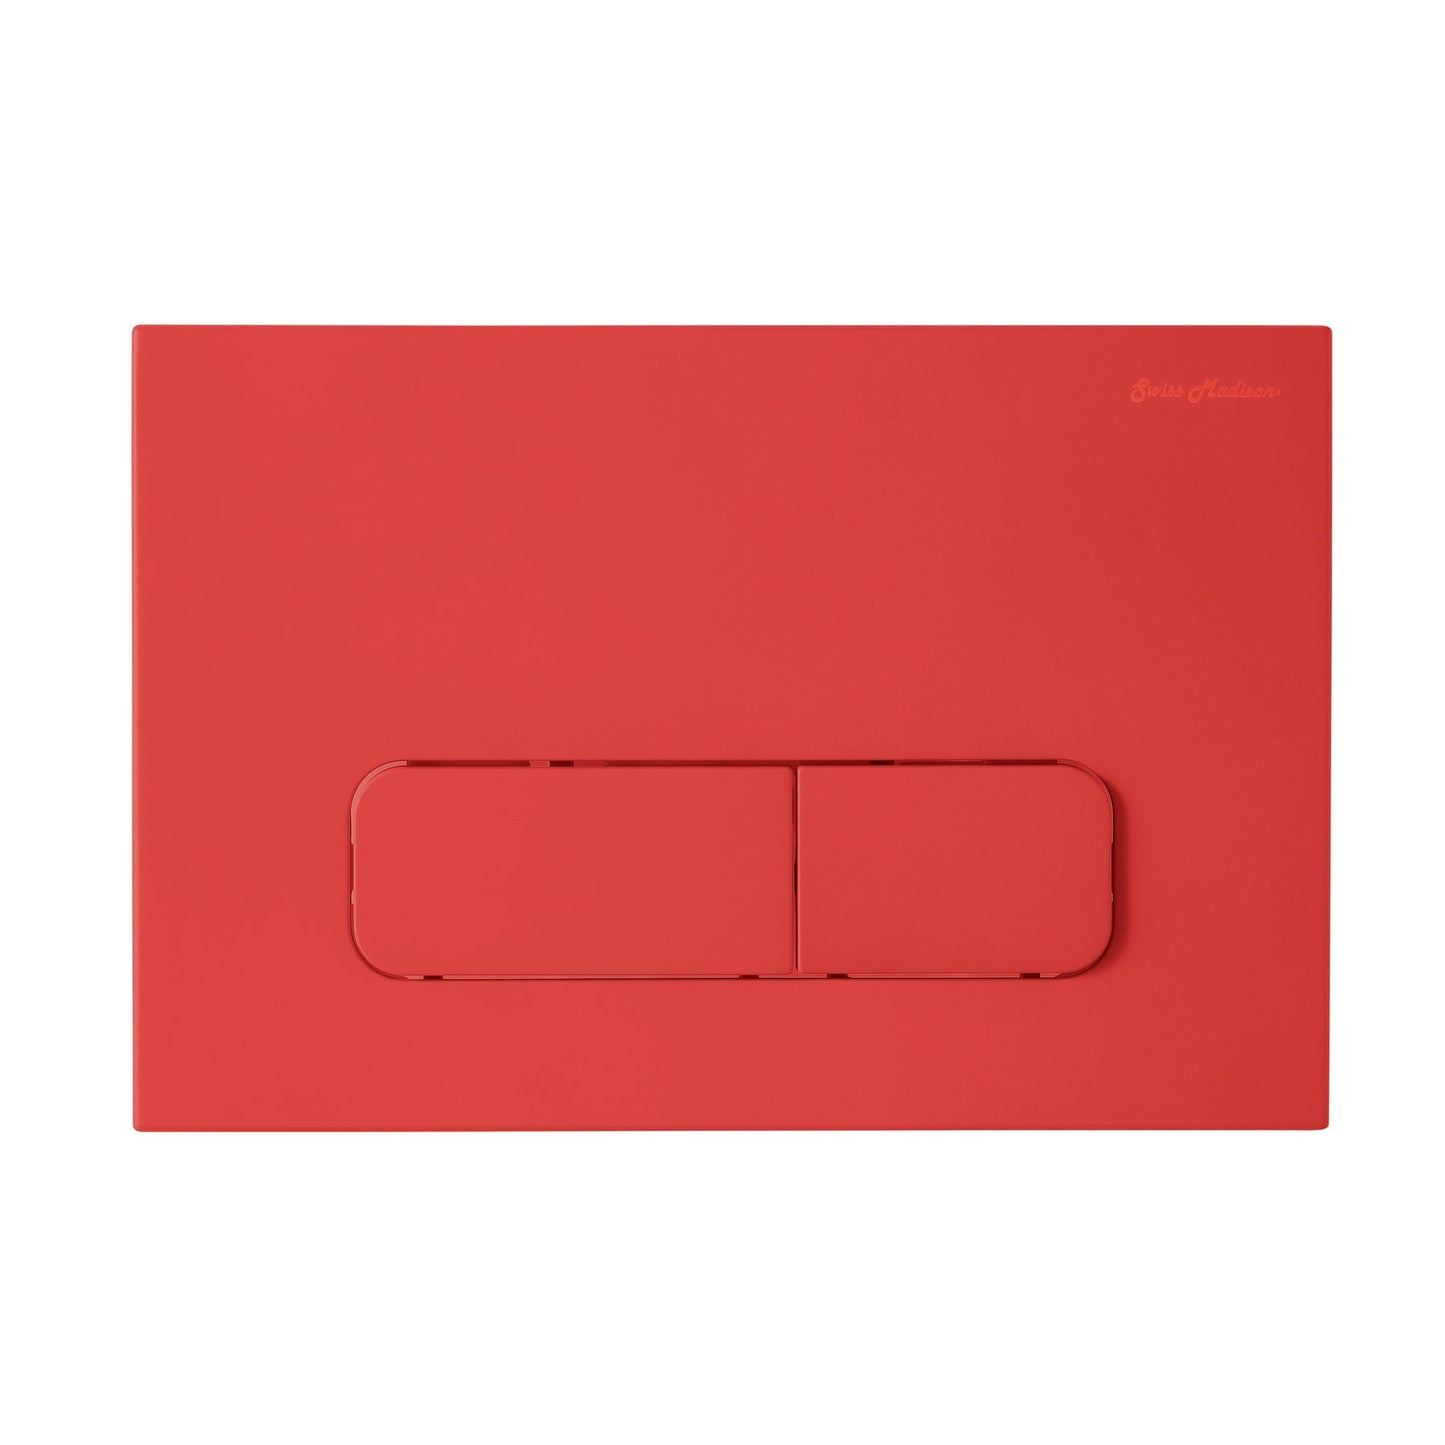 Swiss Madison 10" Matte Red Wall-Mounted Actuator Flush Push Button Plate With Dual Flush System and Rectangle Buttons